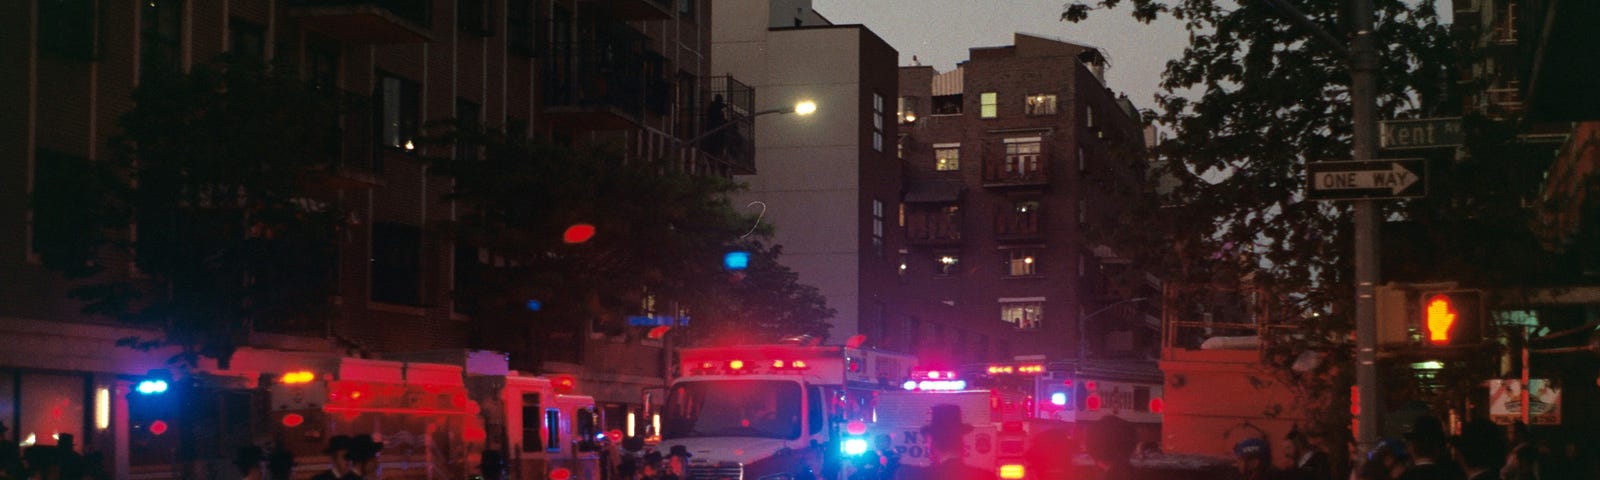 First responder vehicles in low light